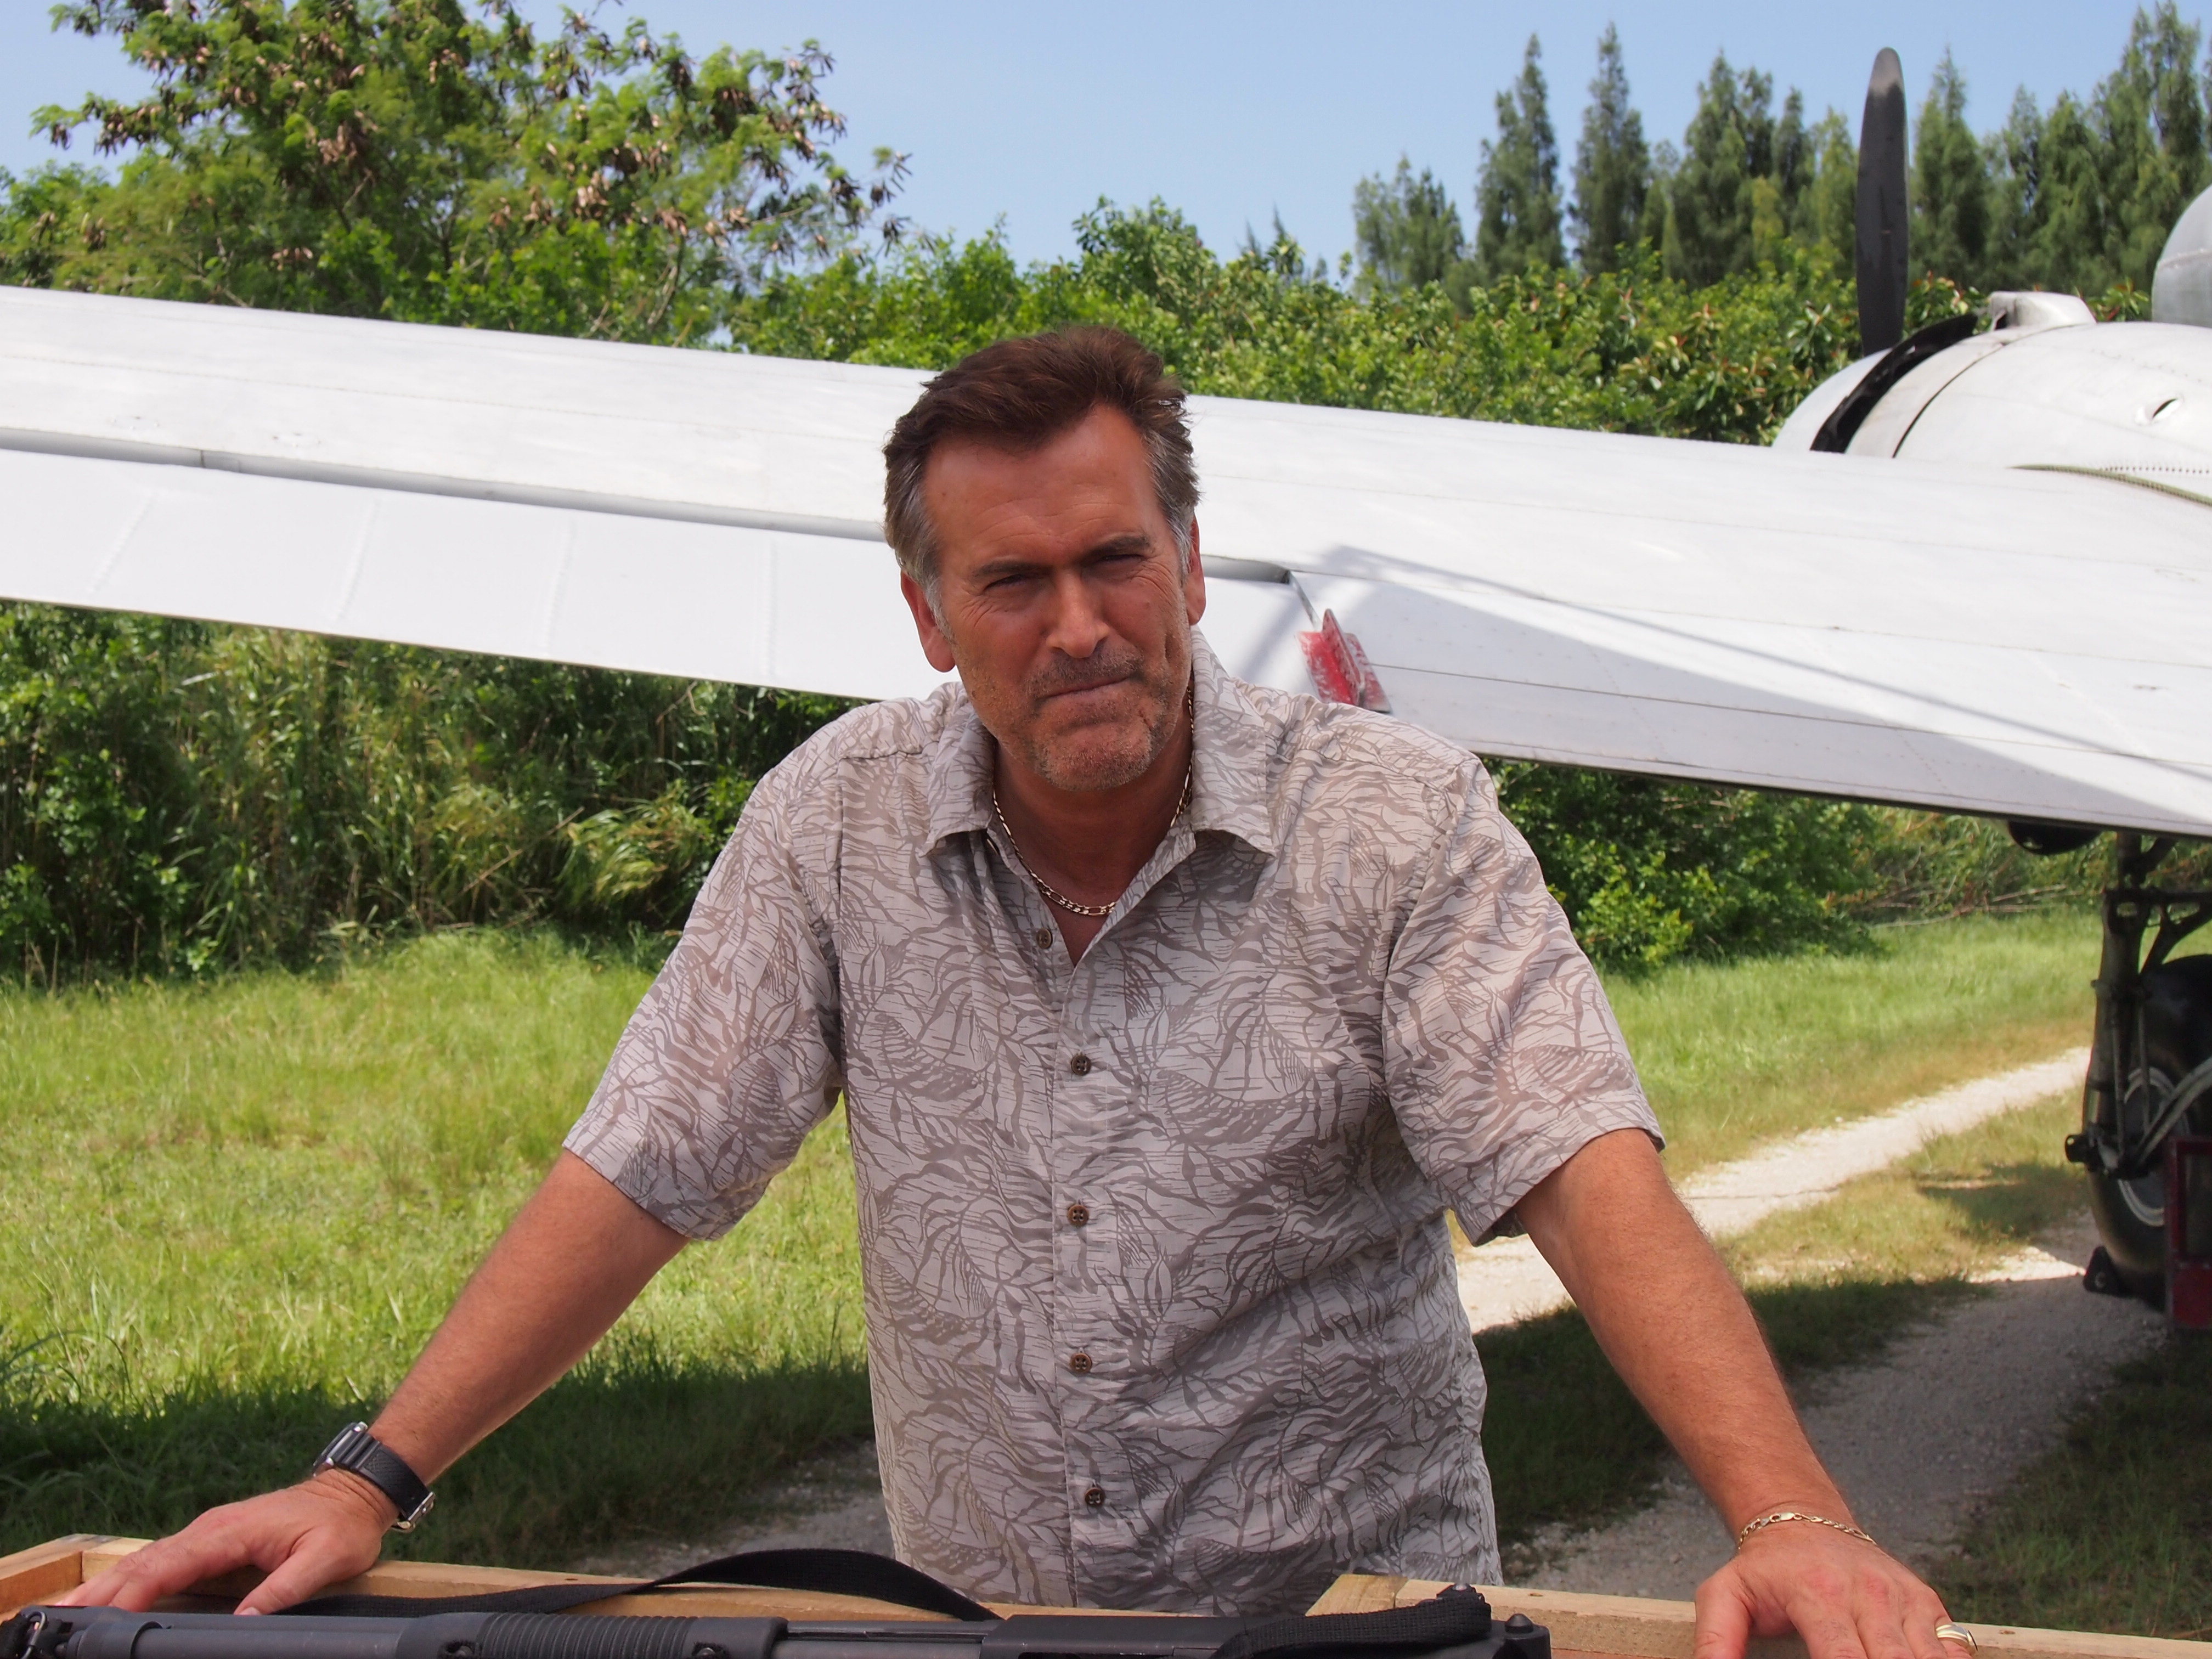 Personal Hairstylist for Bruce Campbell Burn Notice